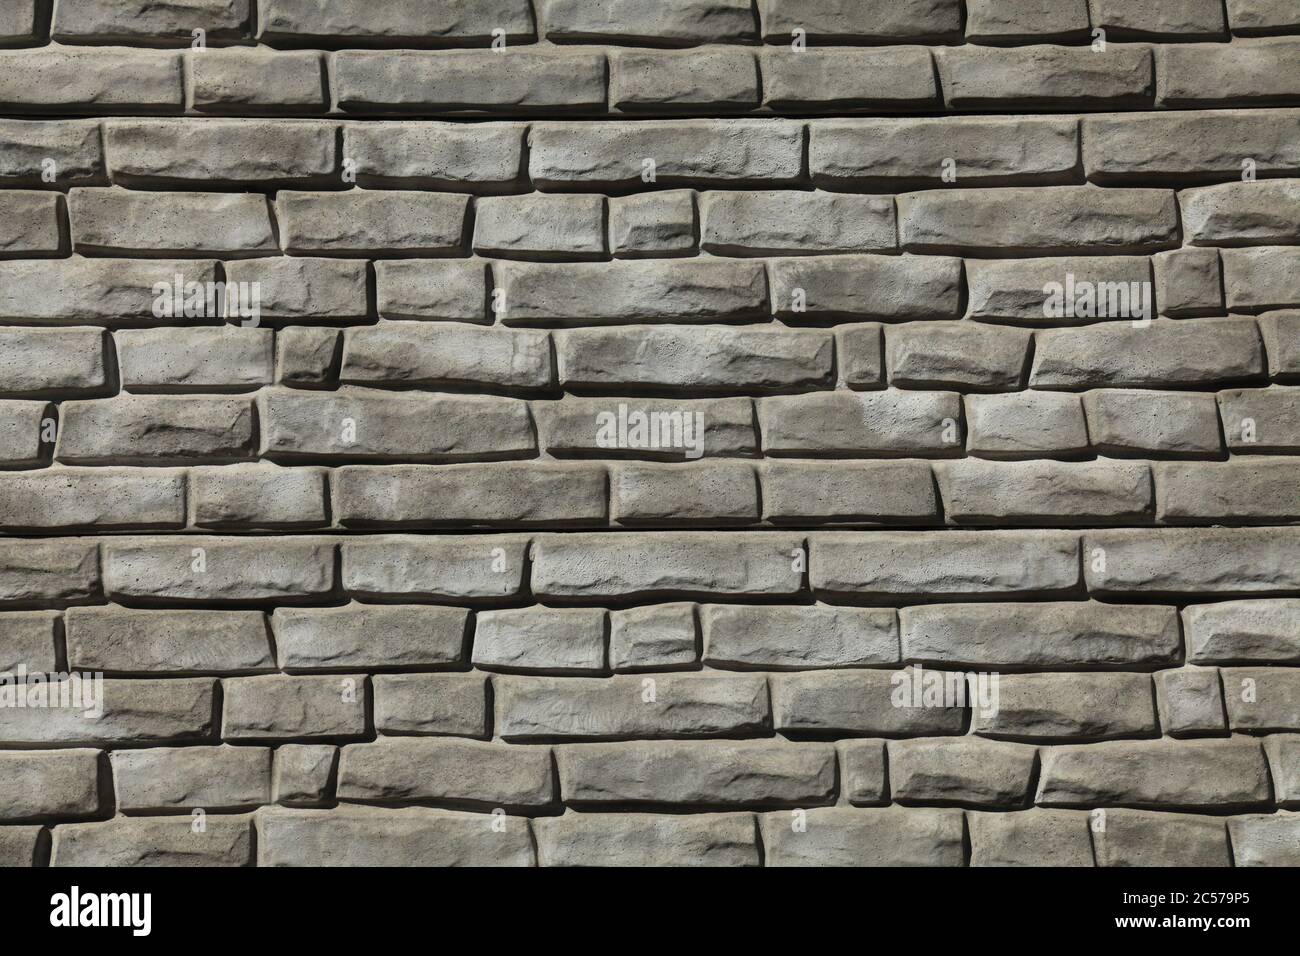 Brick wall texture, background in grey, faded color. Masonry-style concrete wall. Stylish fencing, made of decorative stone. Modern fashionable design Stock Photo